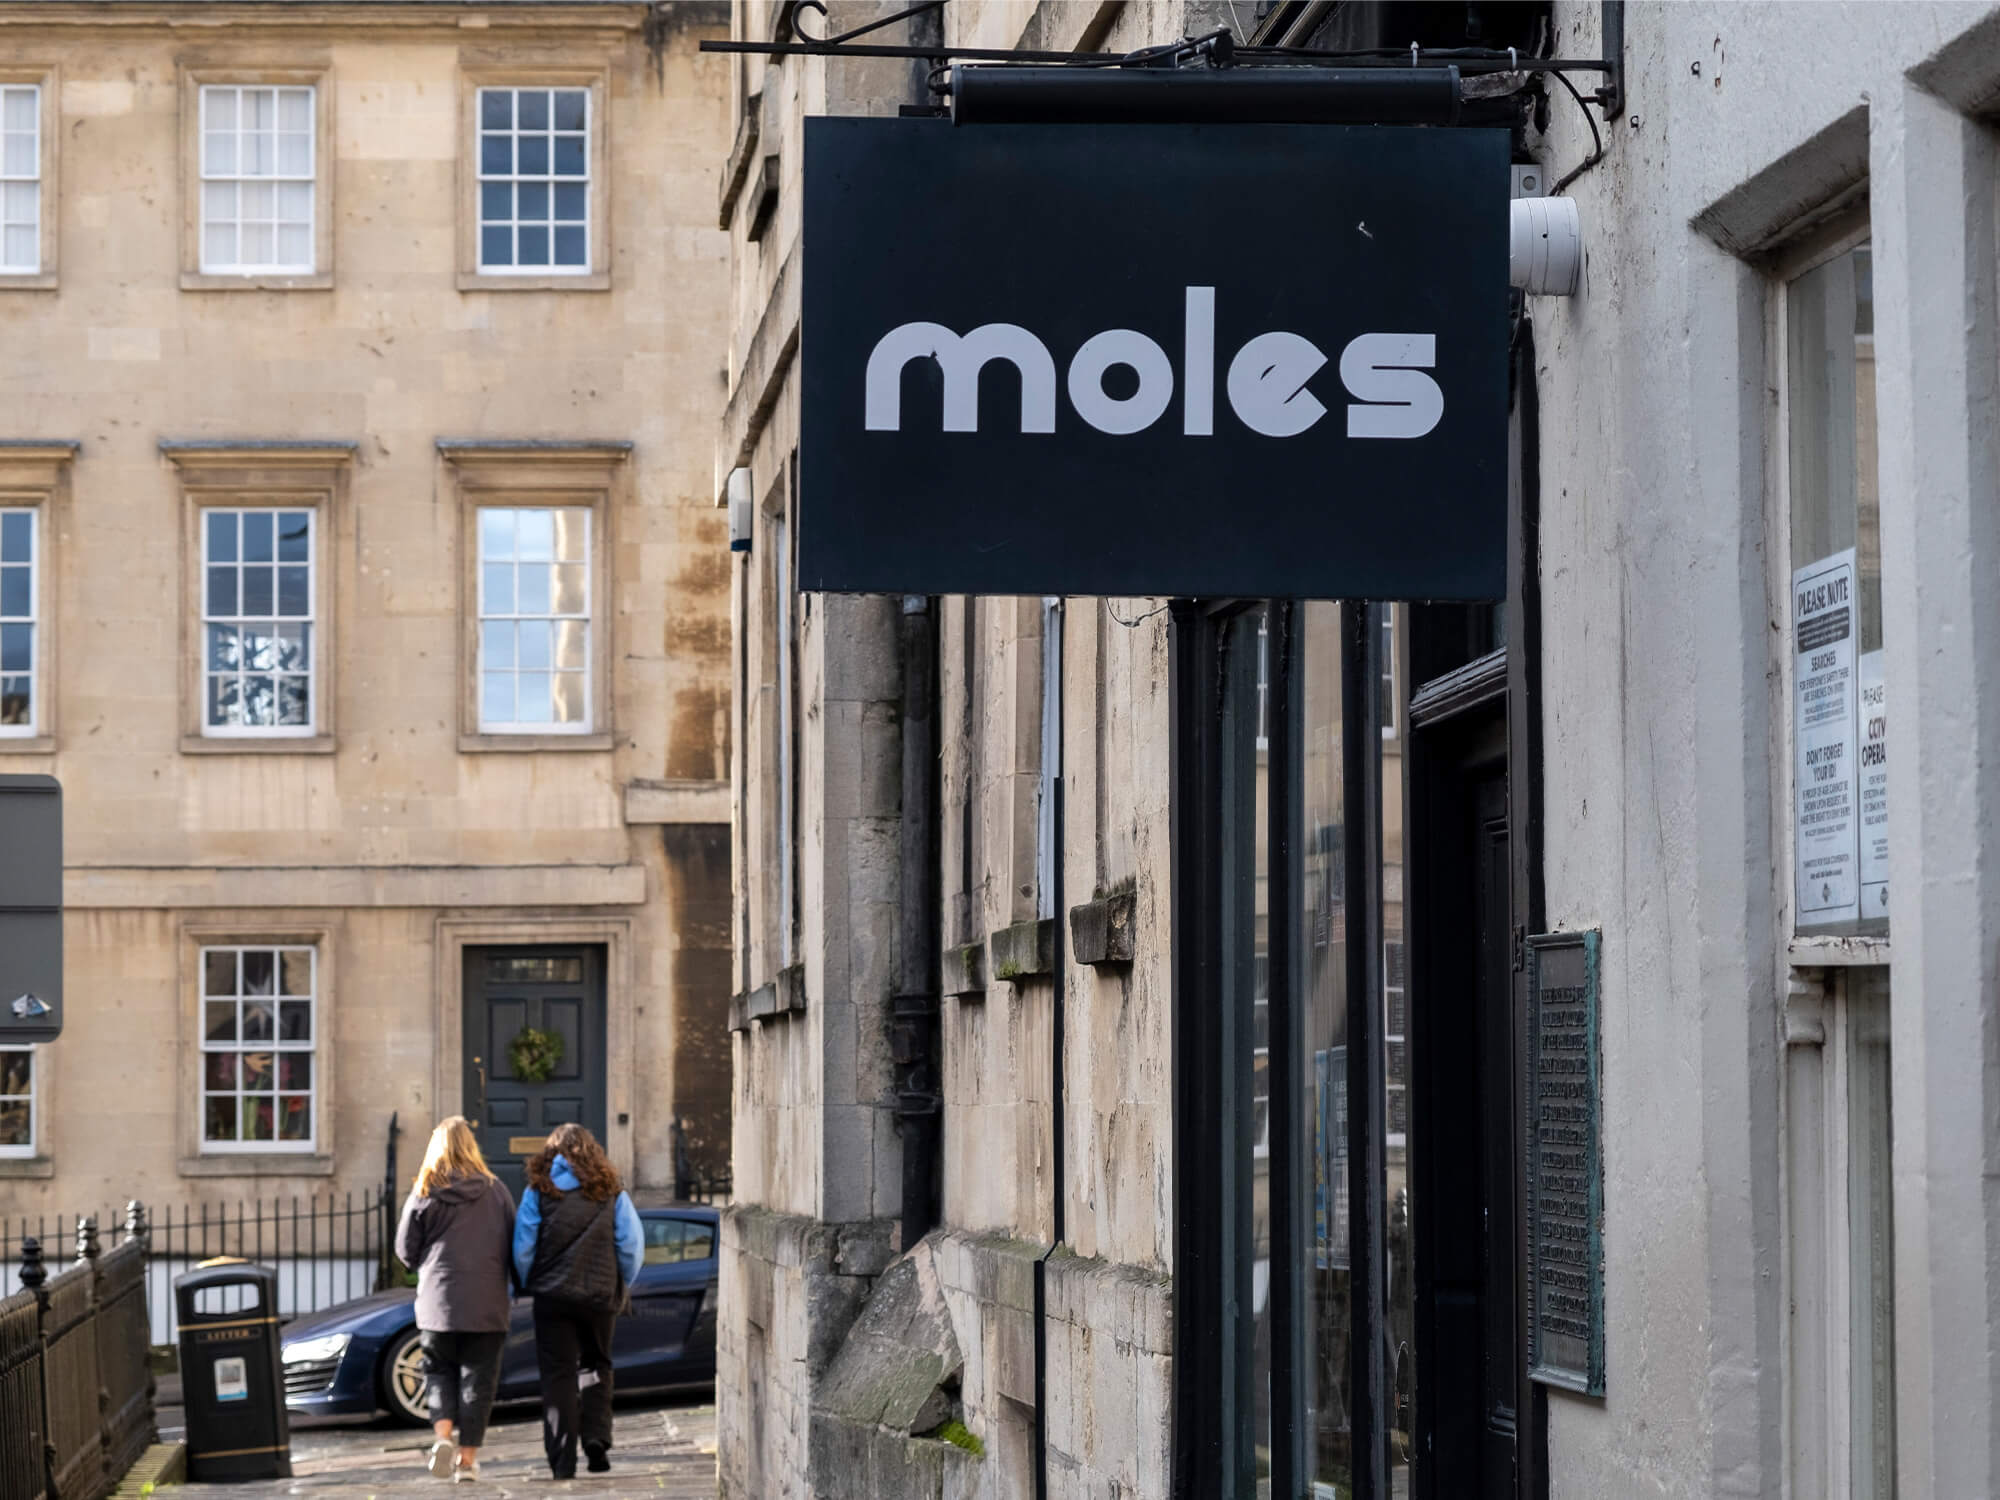 Moles in Bath. The photograph shows its black sign with the name Moles in white text outside the venue.